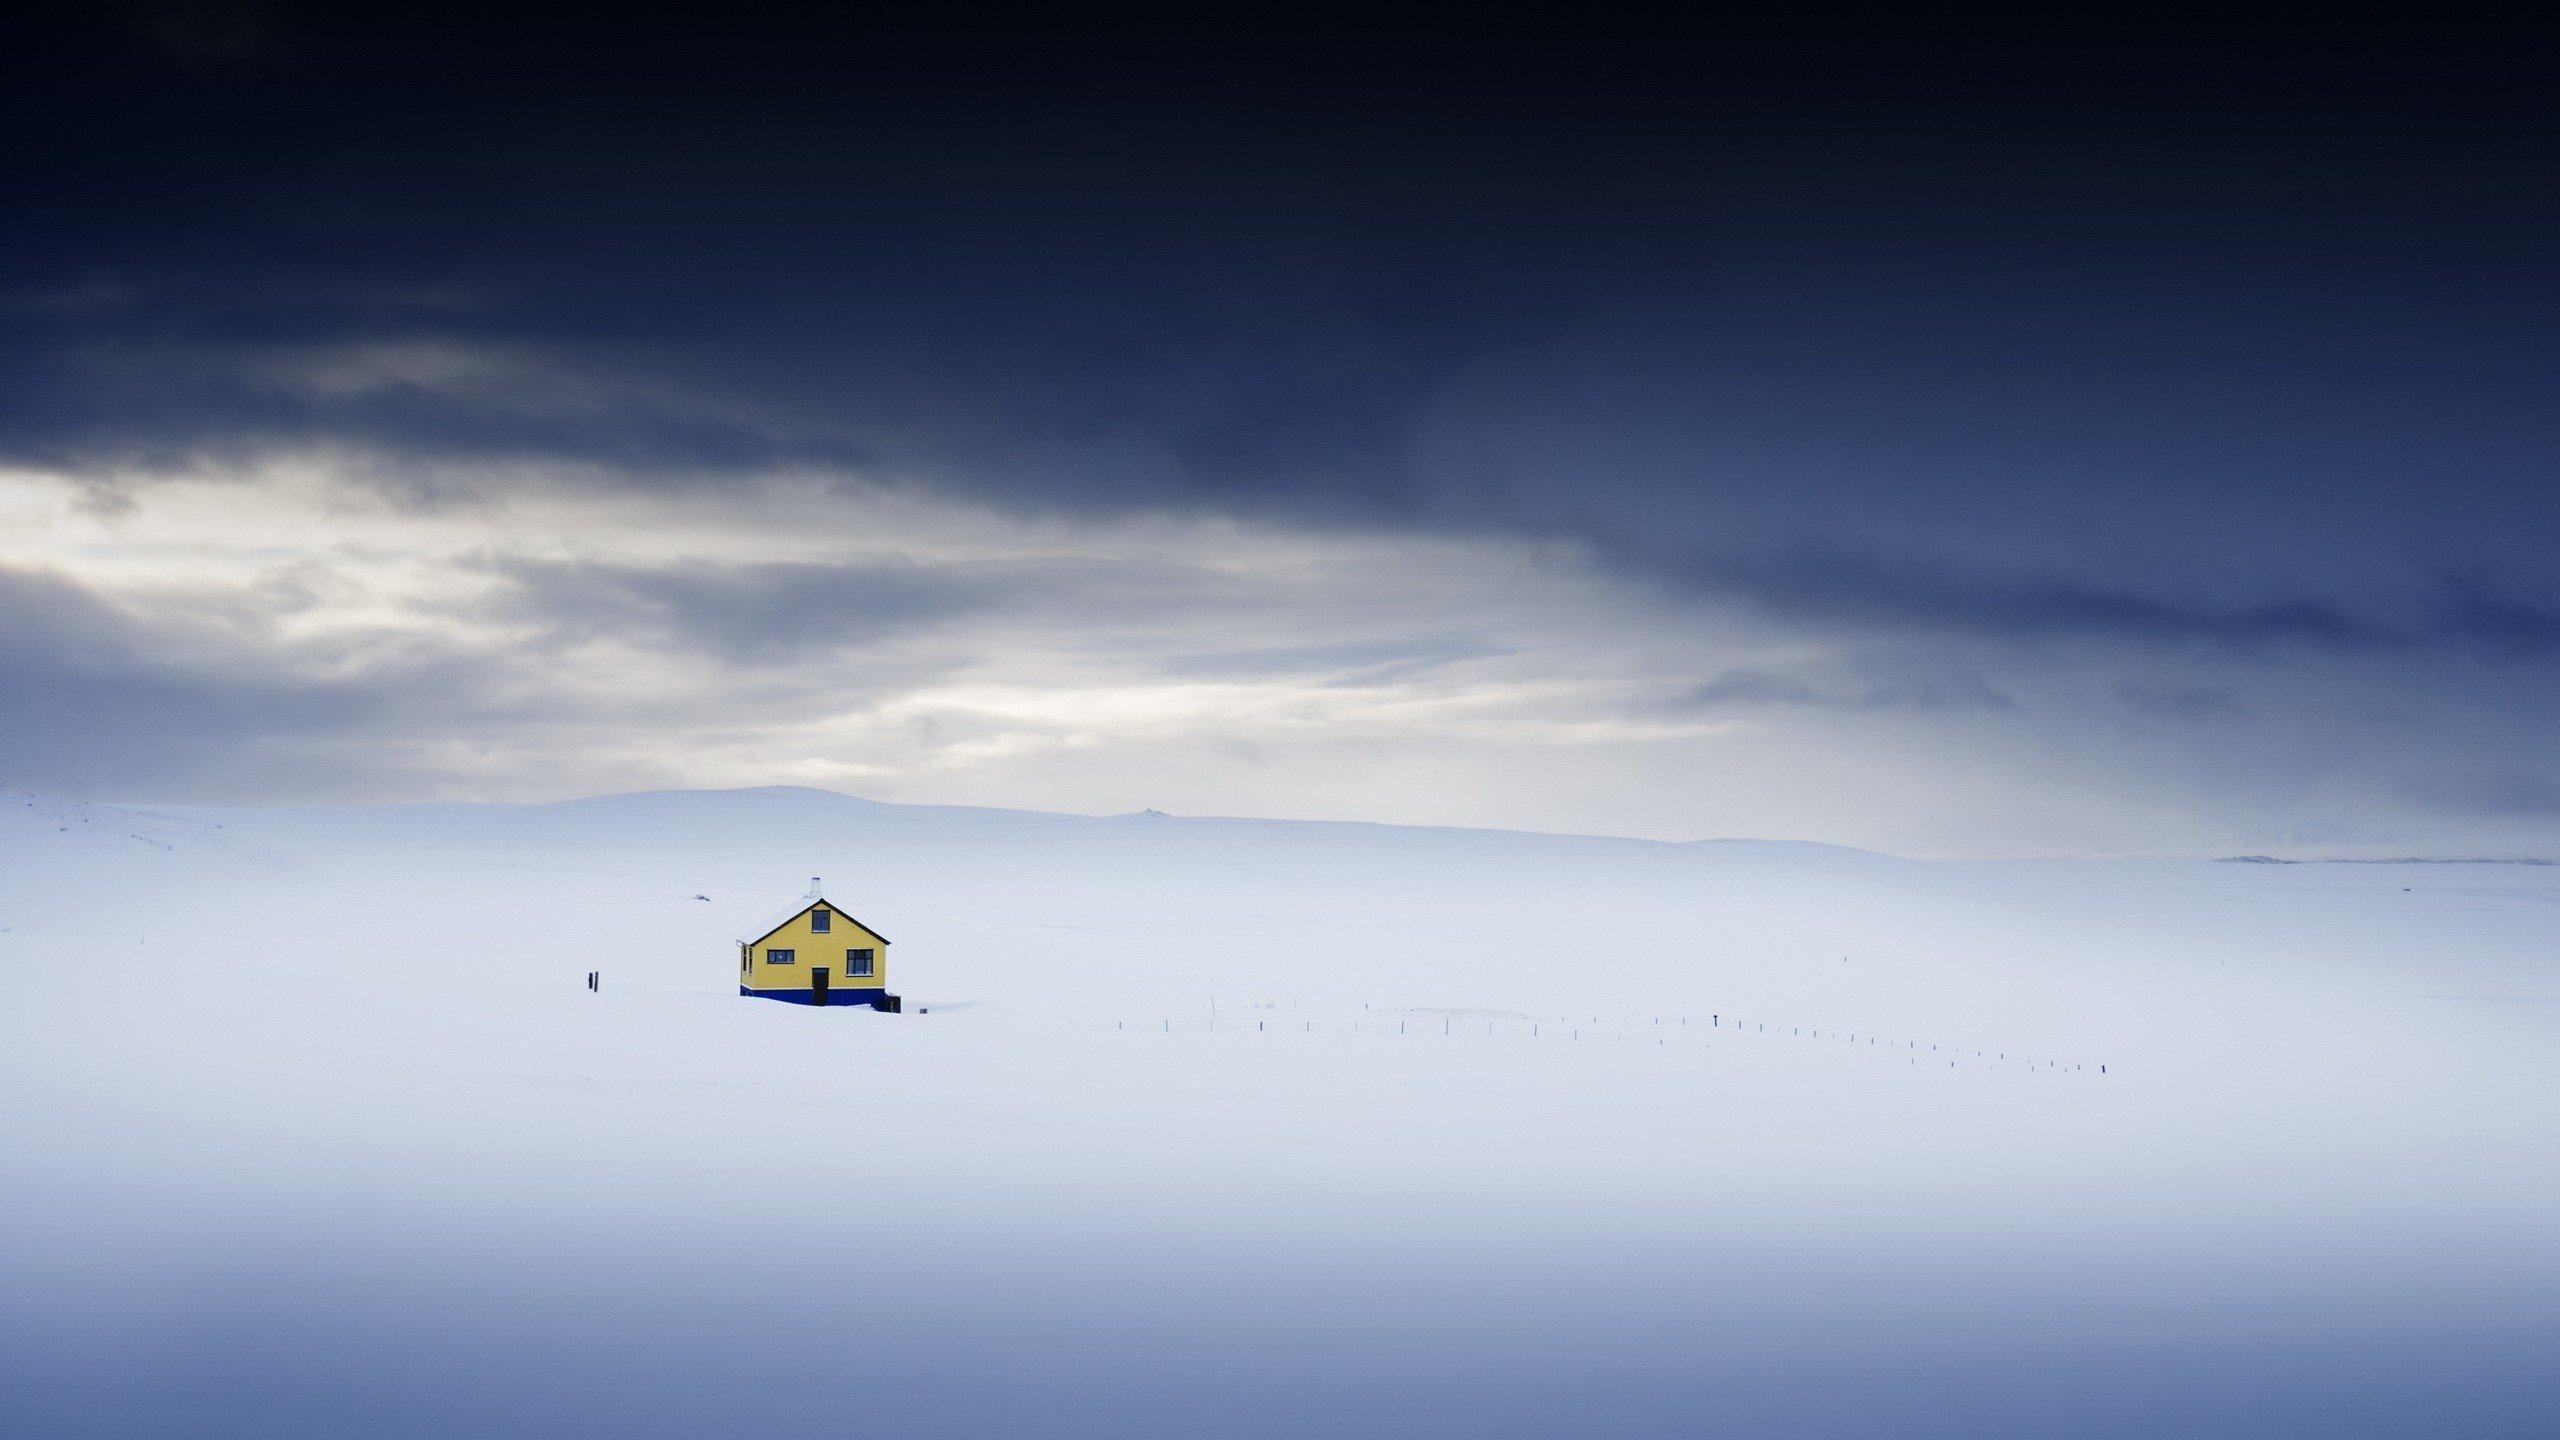 Alone House On Top Of Ice Mountains, HD Nature, 4k Wallpaper